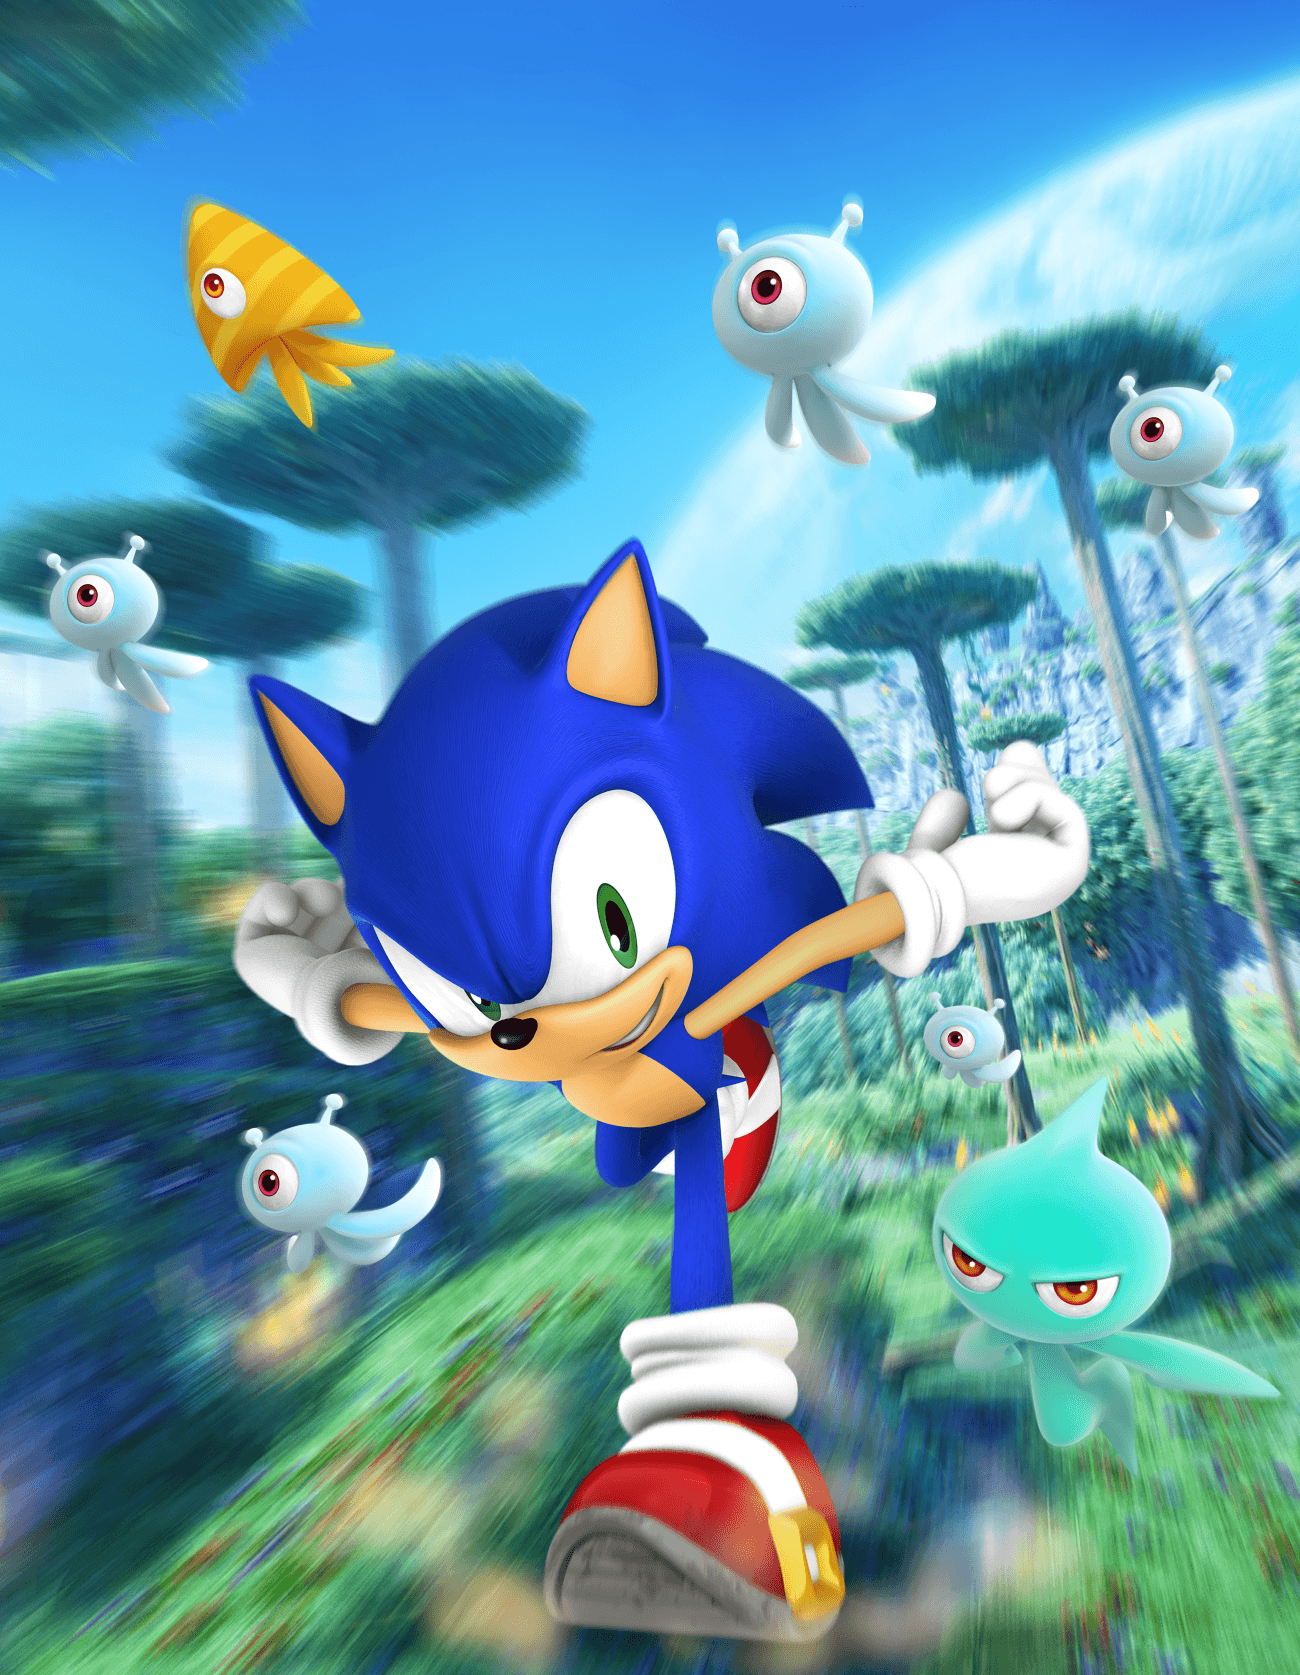 4K Sonic Colors Ultimate New Wallpapers